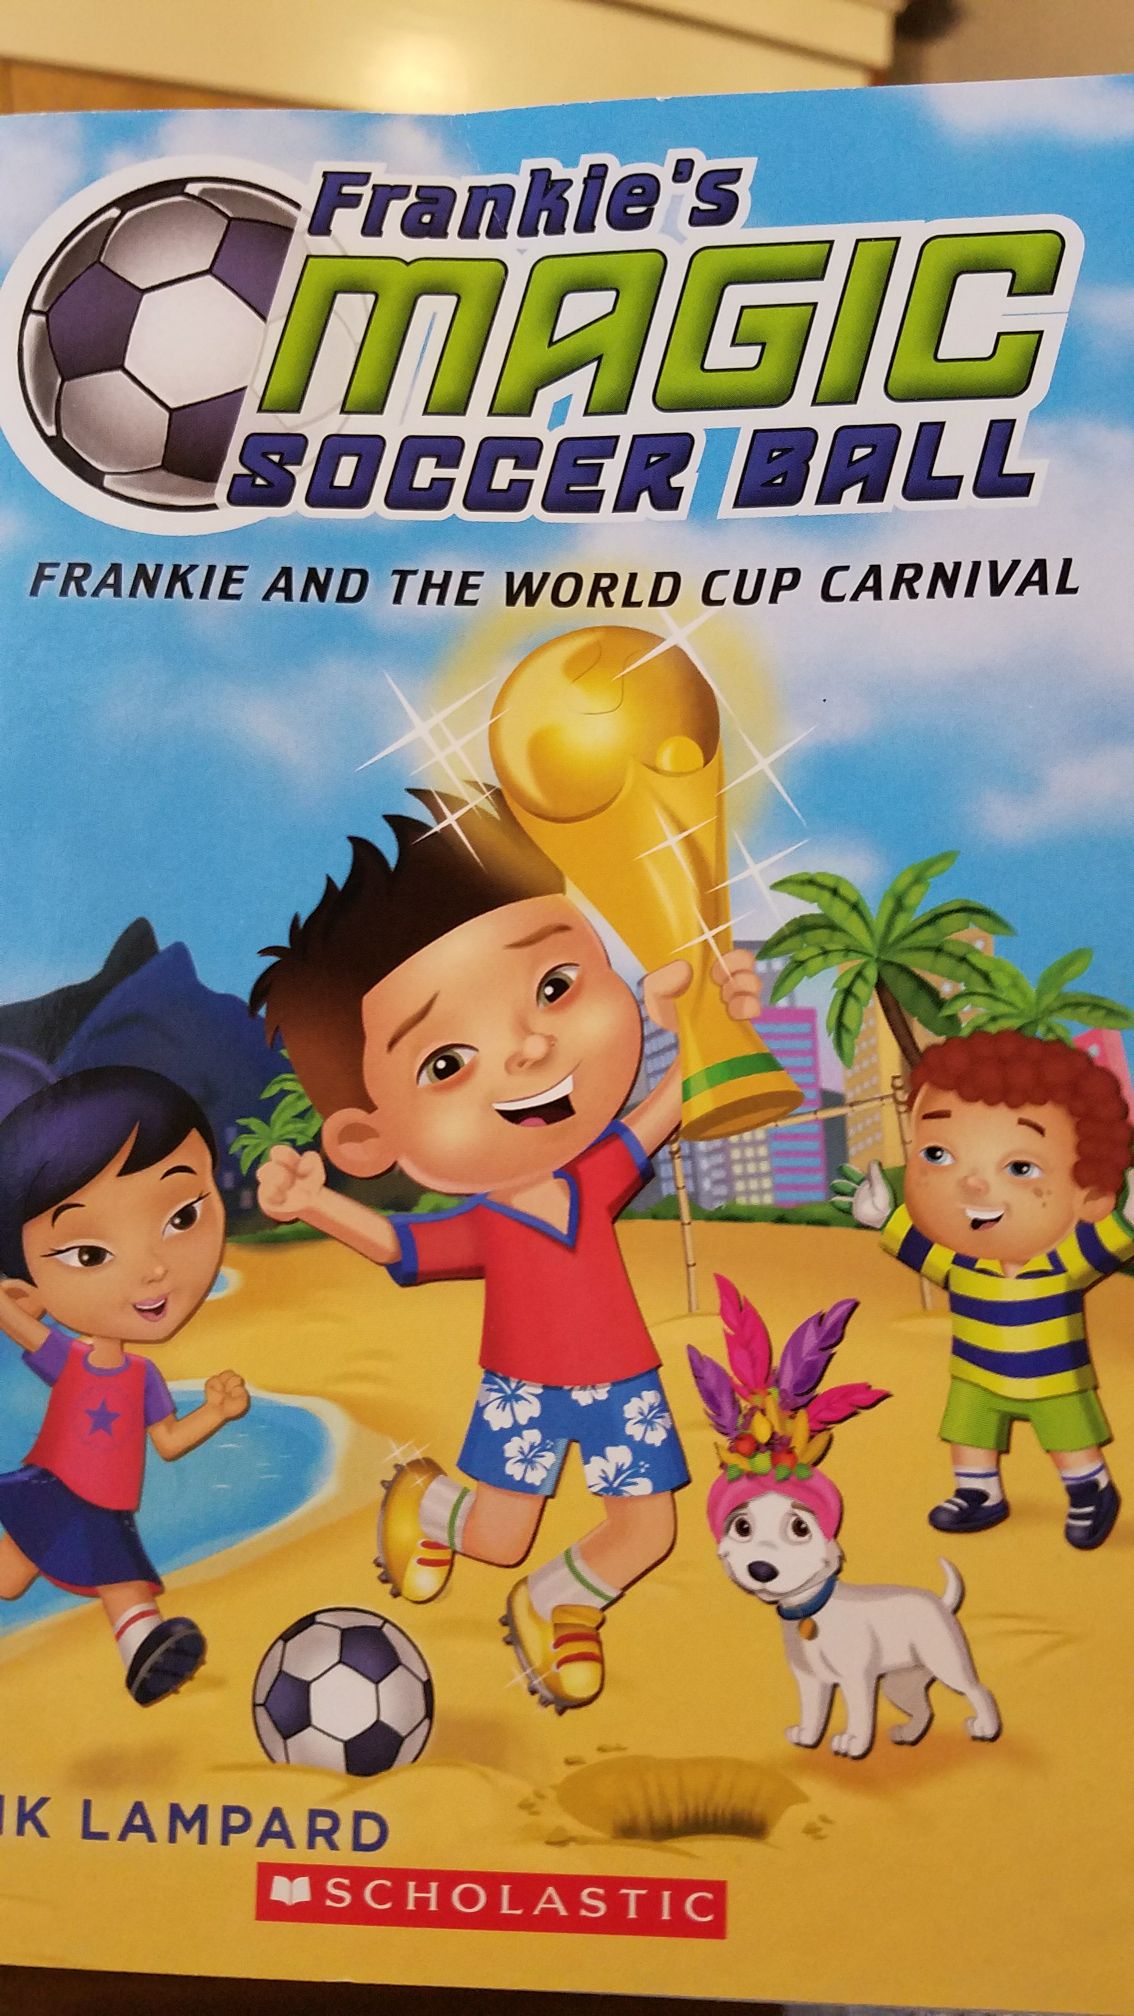 Frankie’s Magic Soccer Ball: Frankie and the World Cup Carnival - Frank Lampard (Scholastic, Inc - Paperback) book collectible [Barcode 9781338089103] - Main Image 1